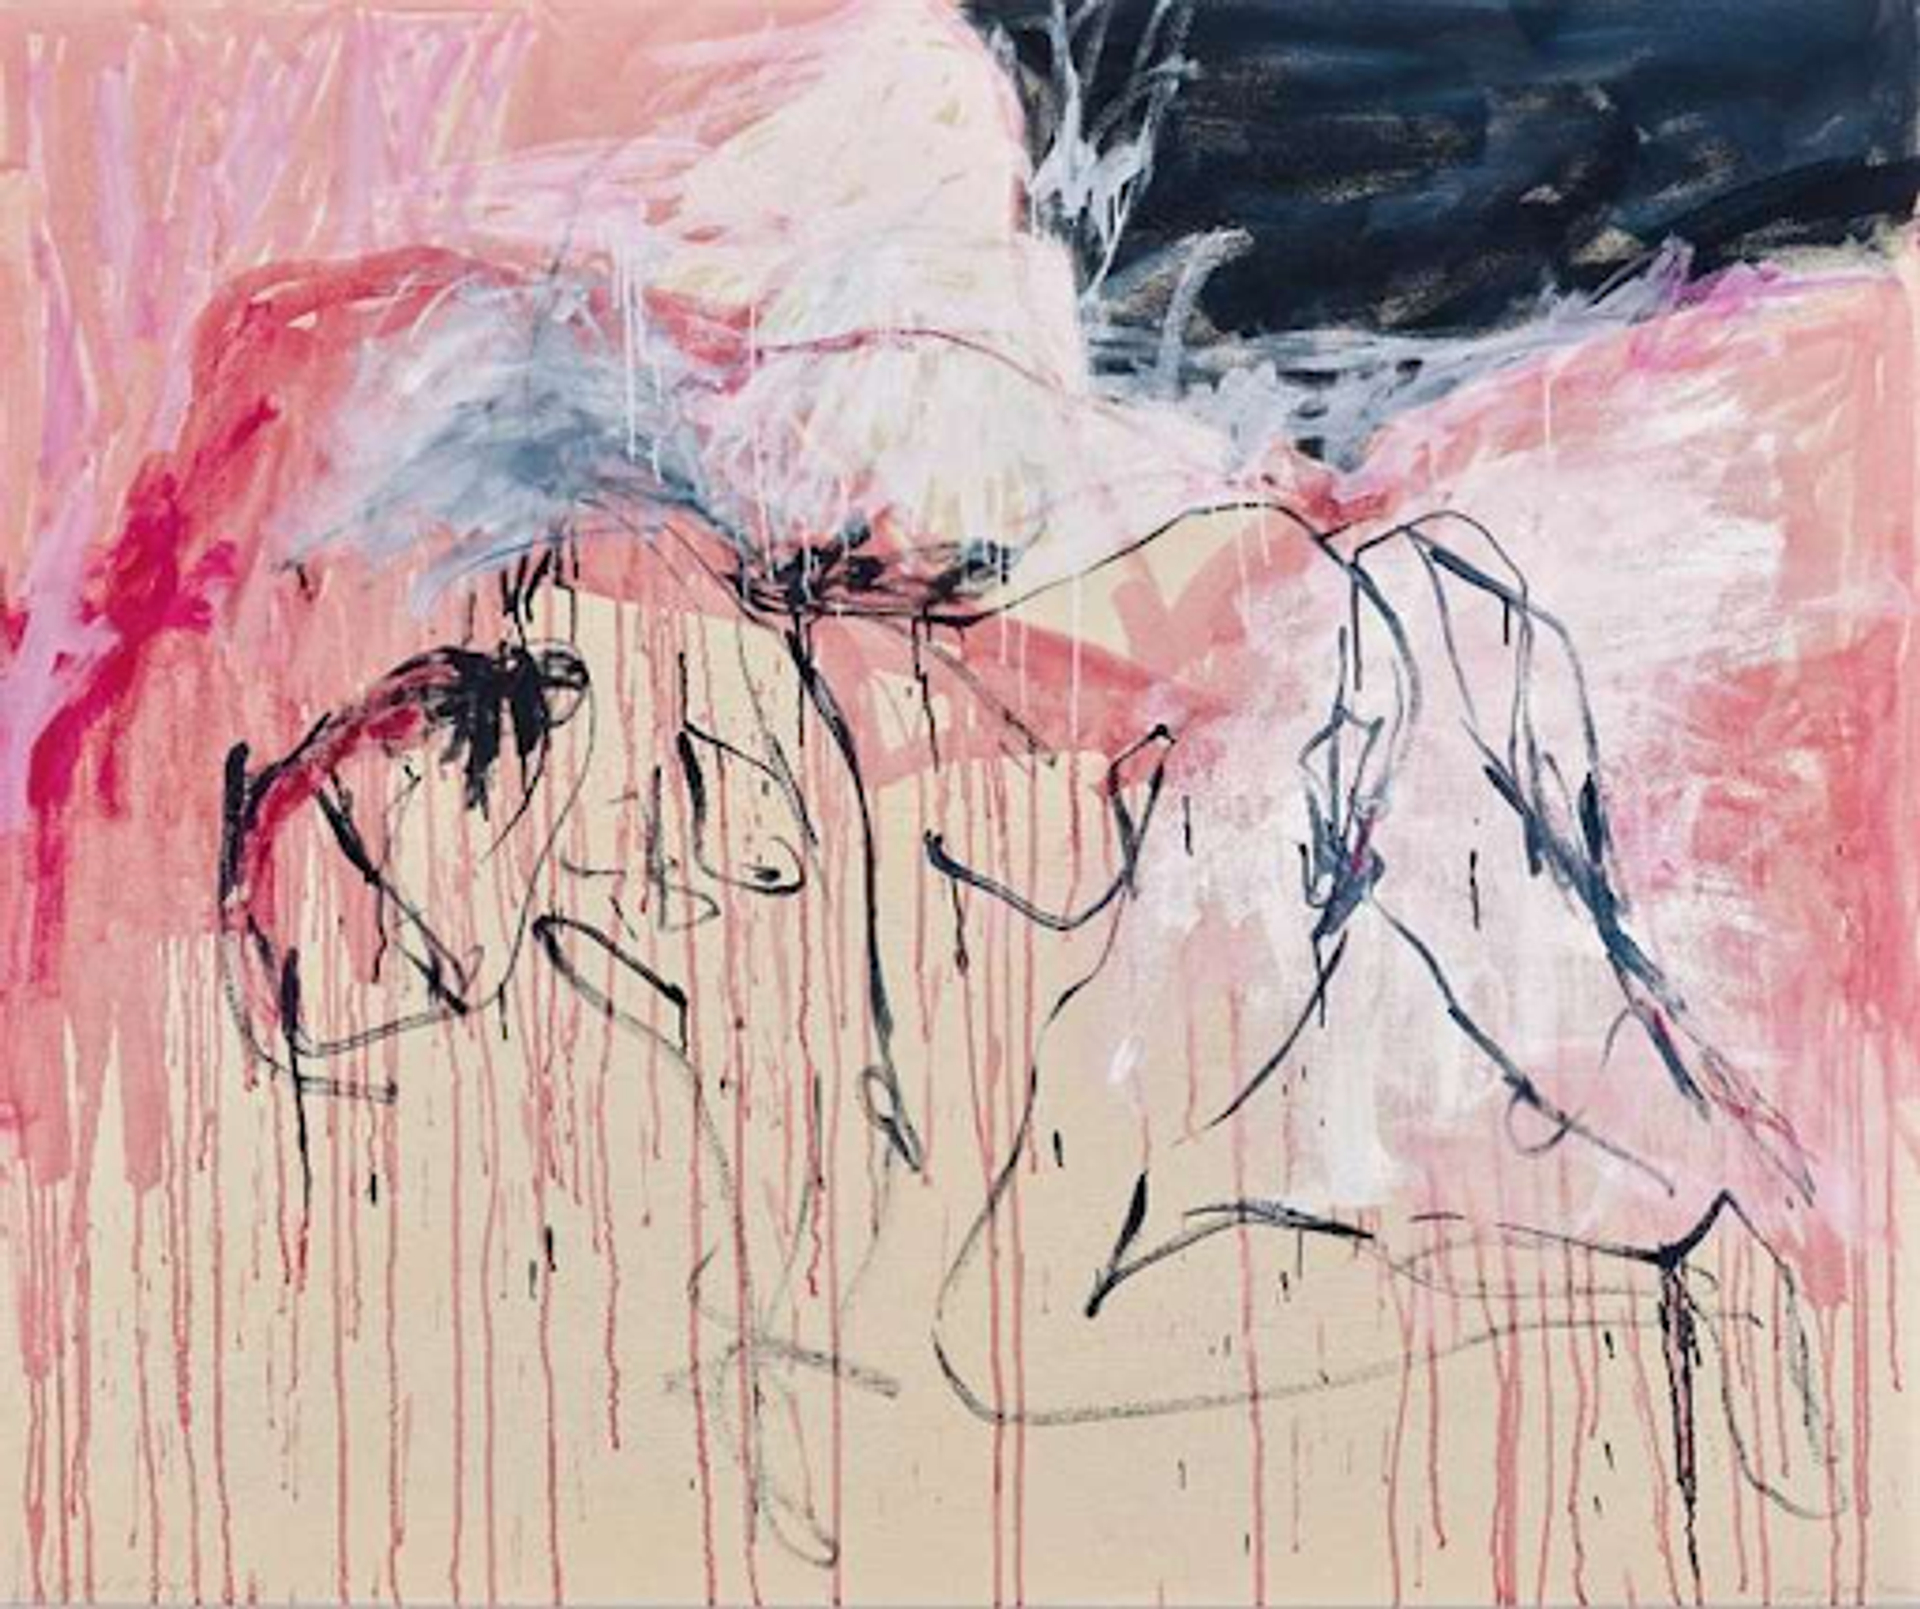 Tracey Emin’s Like A Cloud Of Blood. A slightly obscure painting of a woman covered by a cloud of blood. 